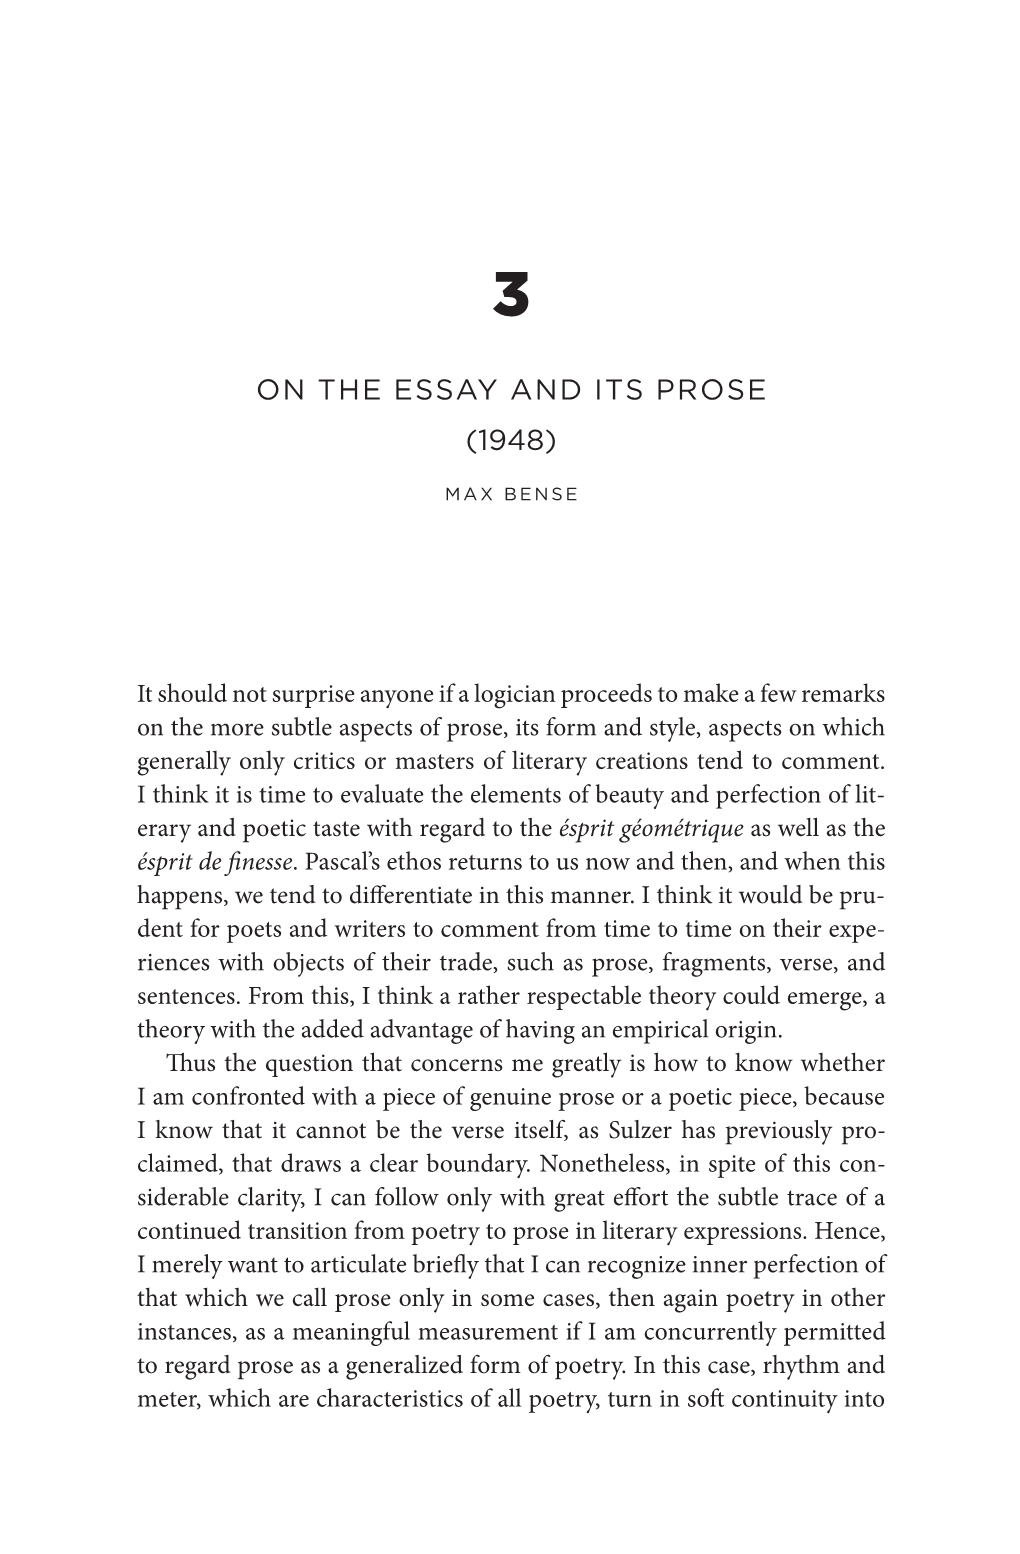 On the Essay and Its Prose (1948)